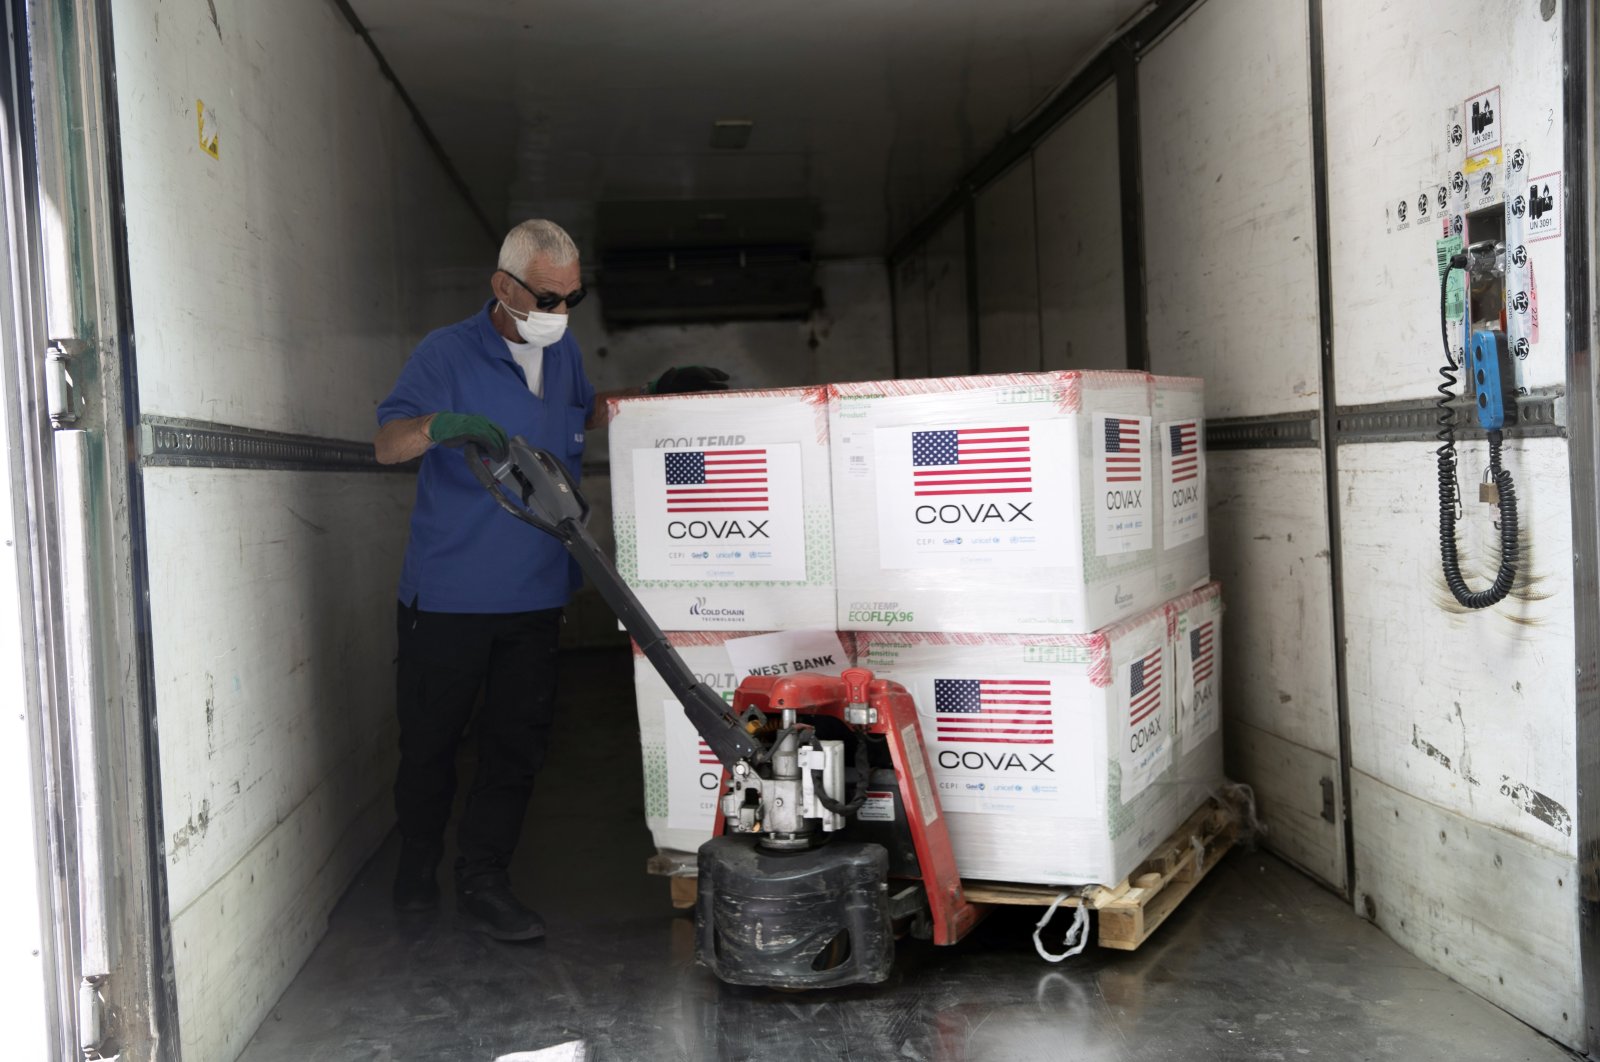 Palestinians unload a shipment of the Moderna coronavirus vaccine donated by the U.S, at the Palestinian health ministry, in the West Bank village of Salem, near Nablus, Aug. 24, 2021. (AP Photo)